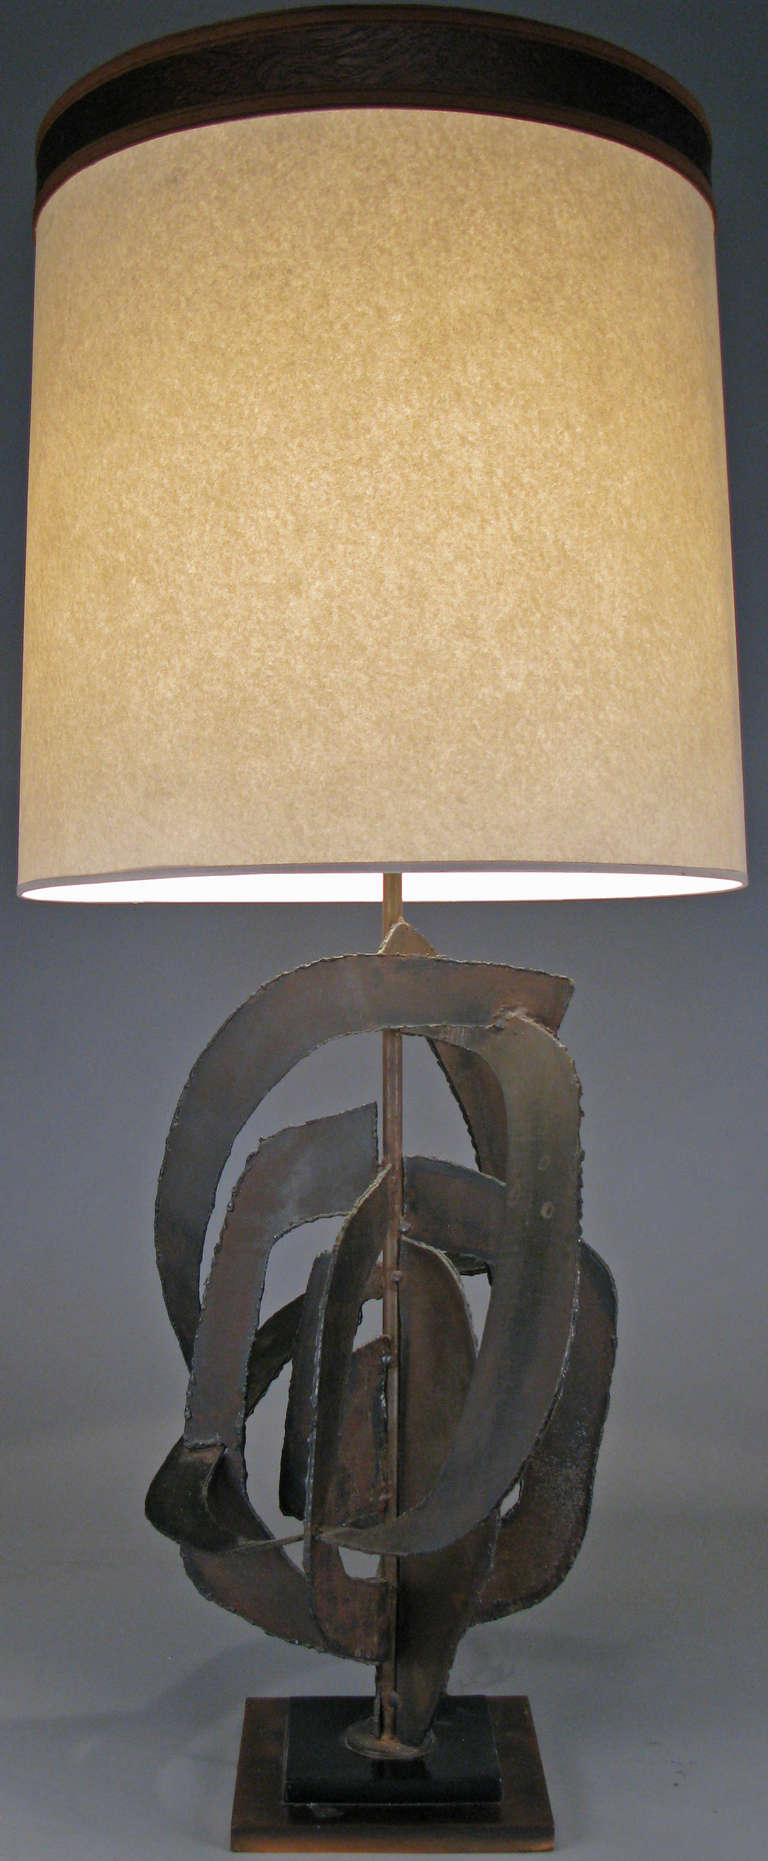 an outstanding large scale table lamp designed by Harry Balmer for Flemington Ironworks. the base of torch-cut steel in an abstract open form, welded to an iron core, raised on a stepped base of steel and copper. excellent condition.